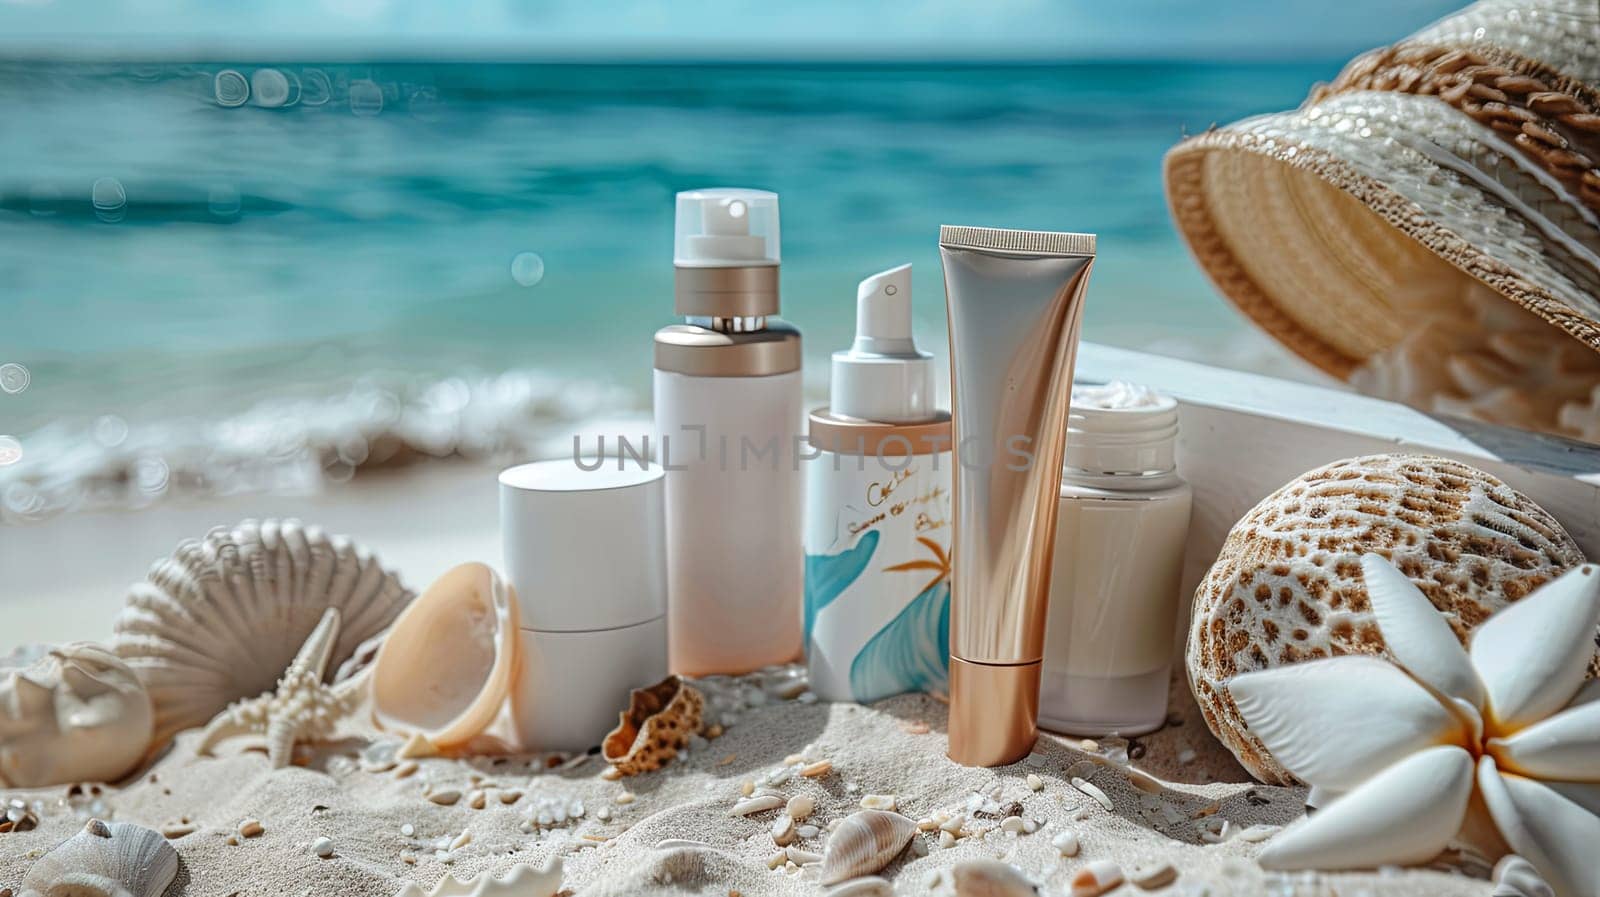 A bottle of lotion is placed on the sandy beach with the ocean in the background.